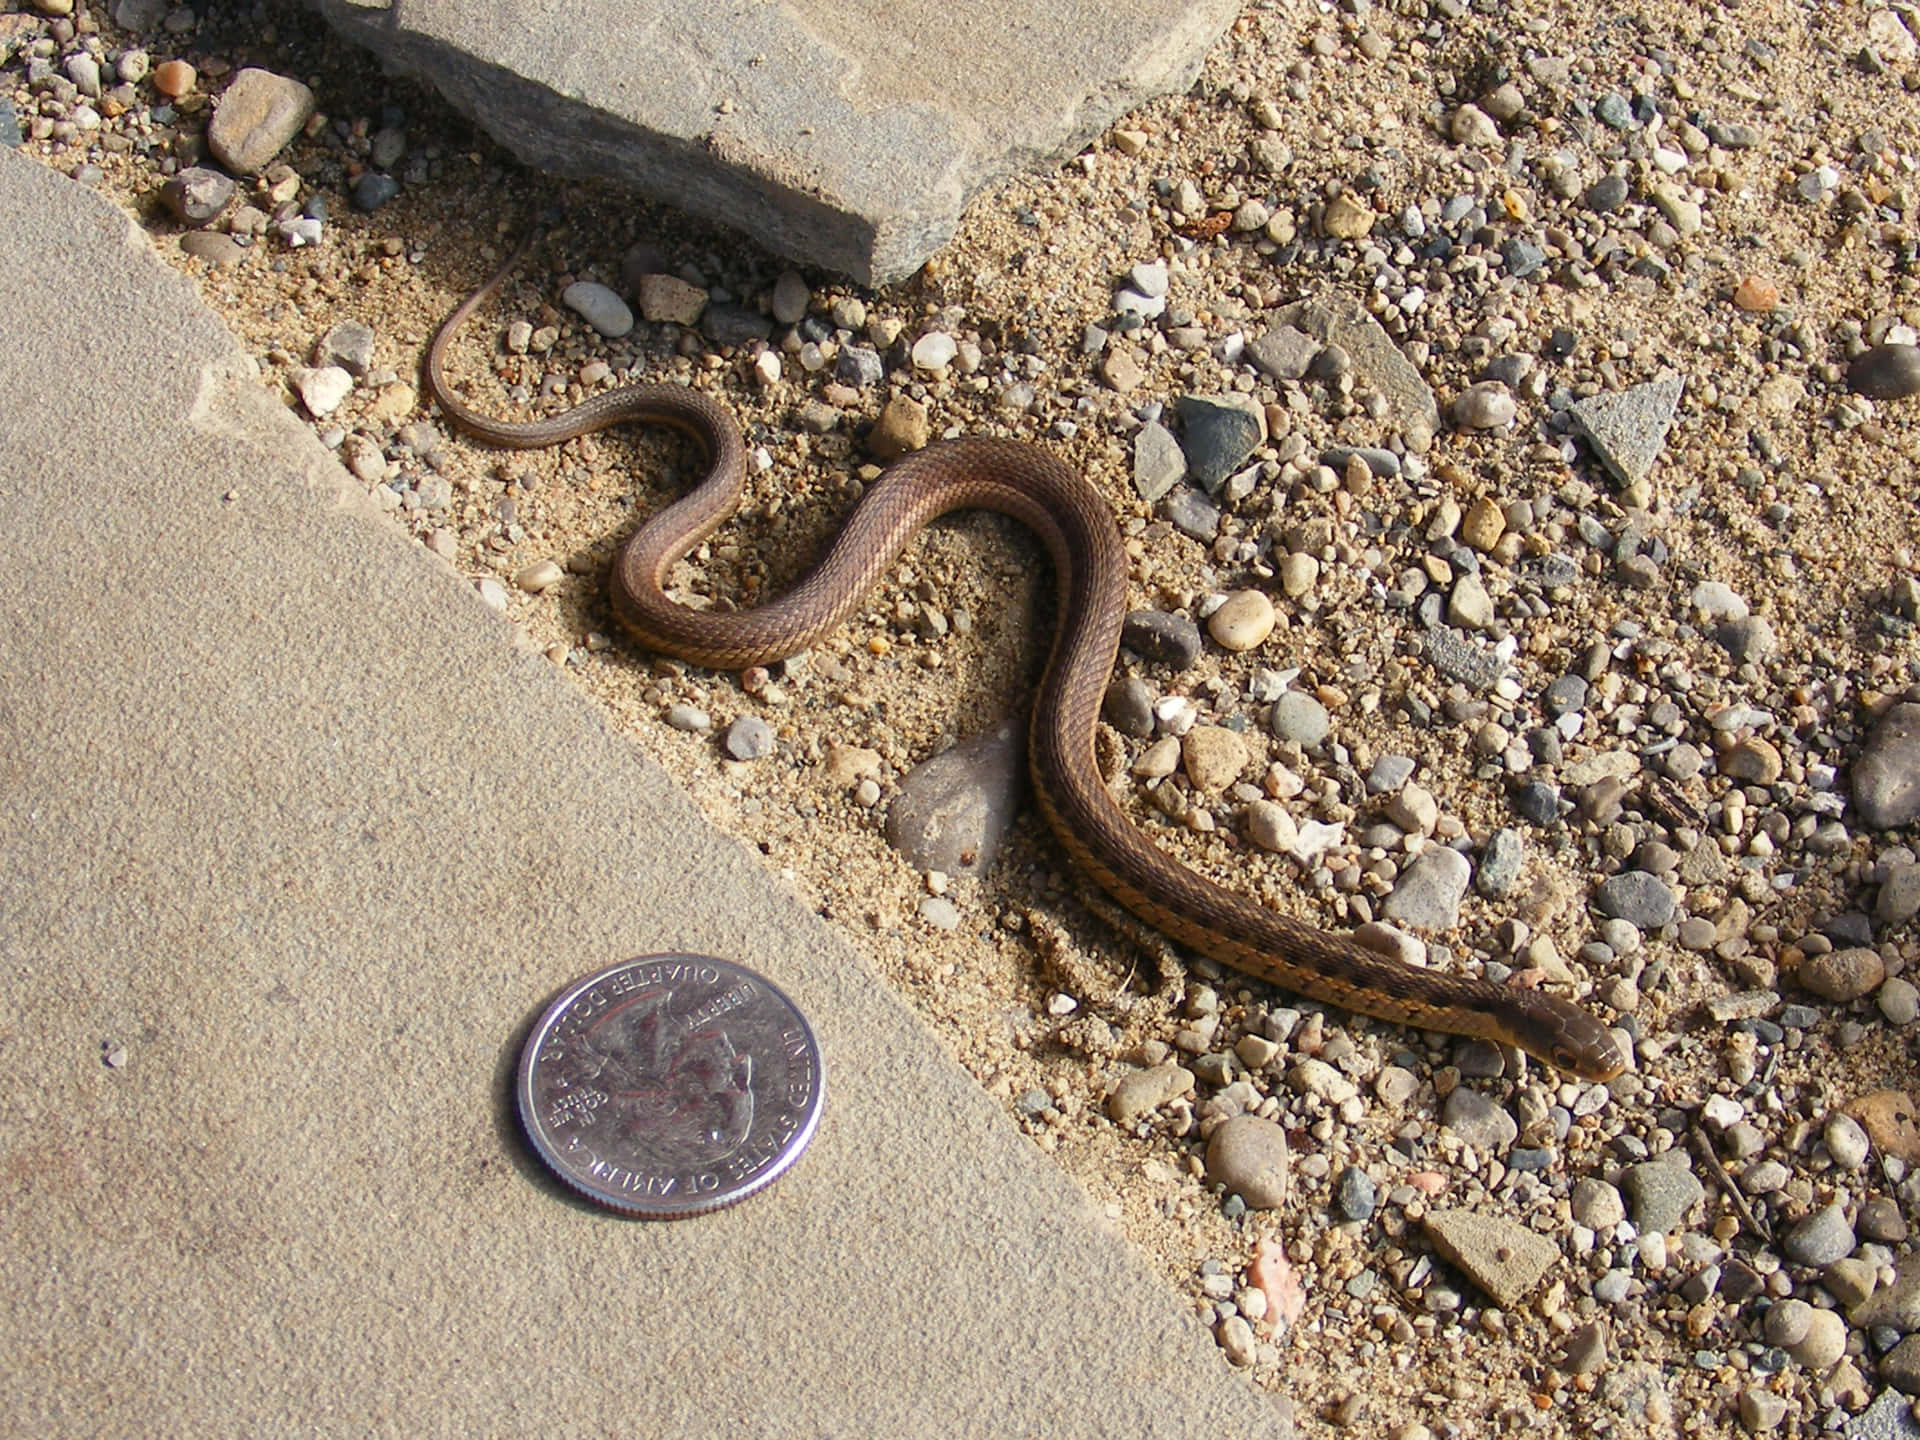 Snakes Thrive in Michigan's Natural Landscapes